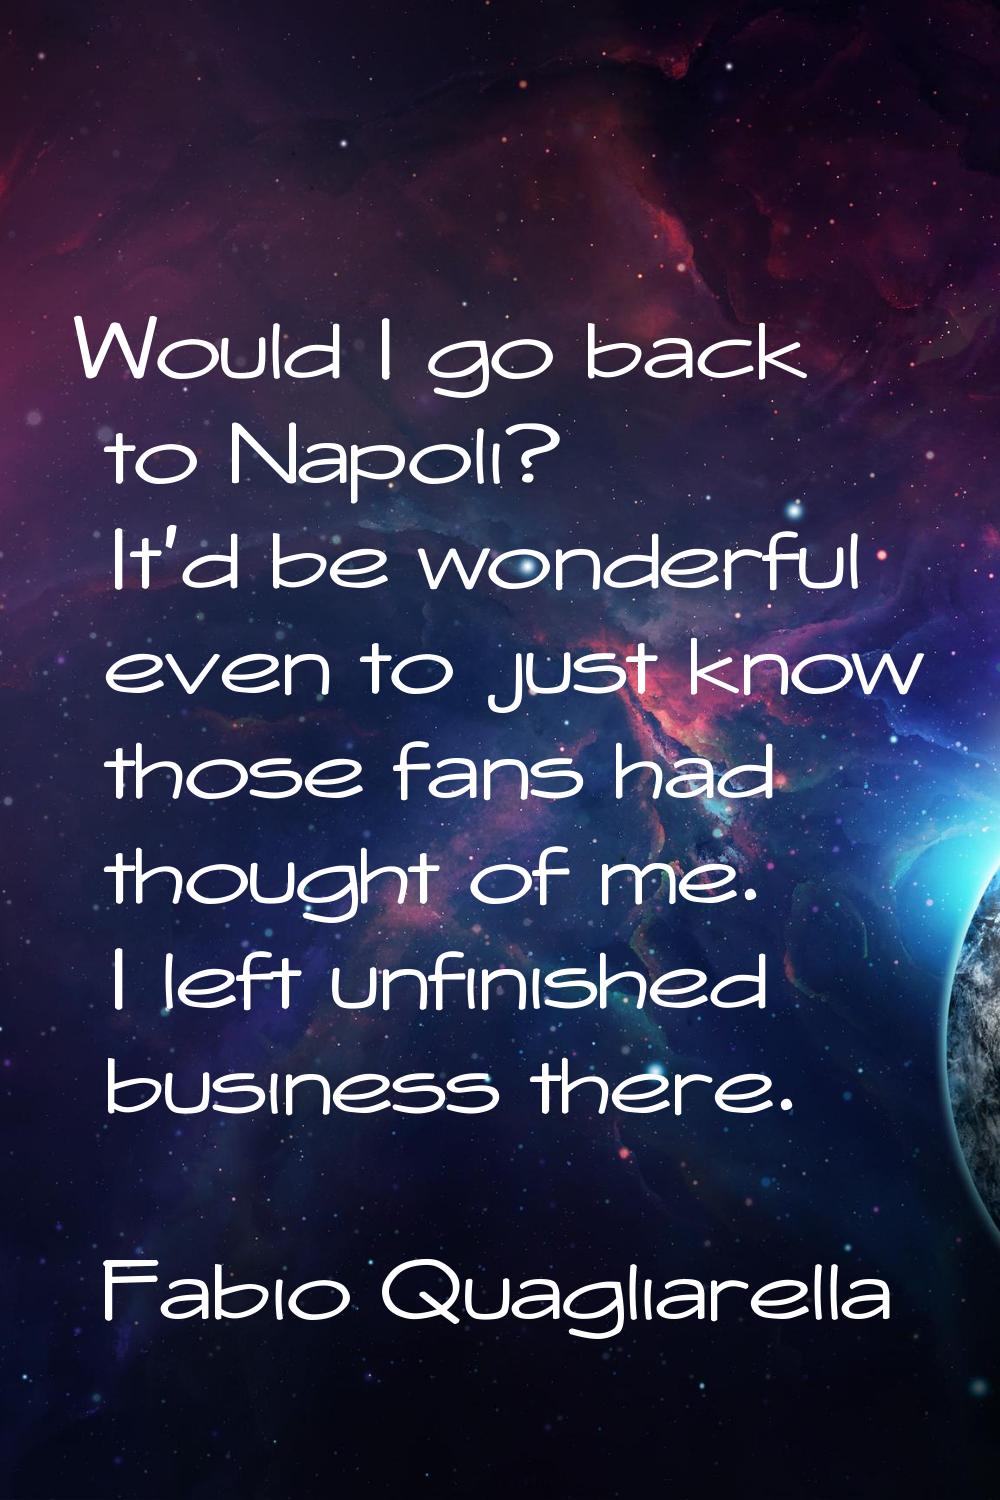 Would I go back to Napoli? It'd be wonderful even to just know those fans had thought of me. I left